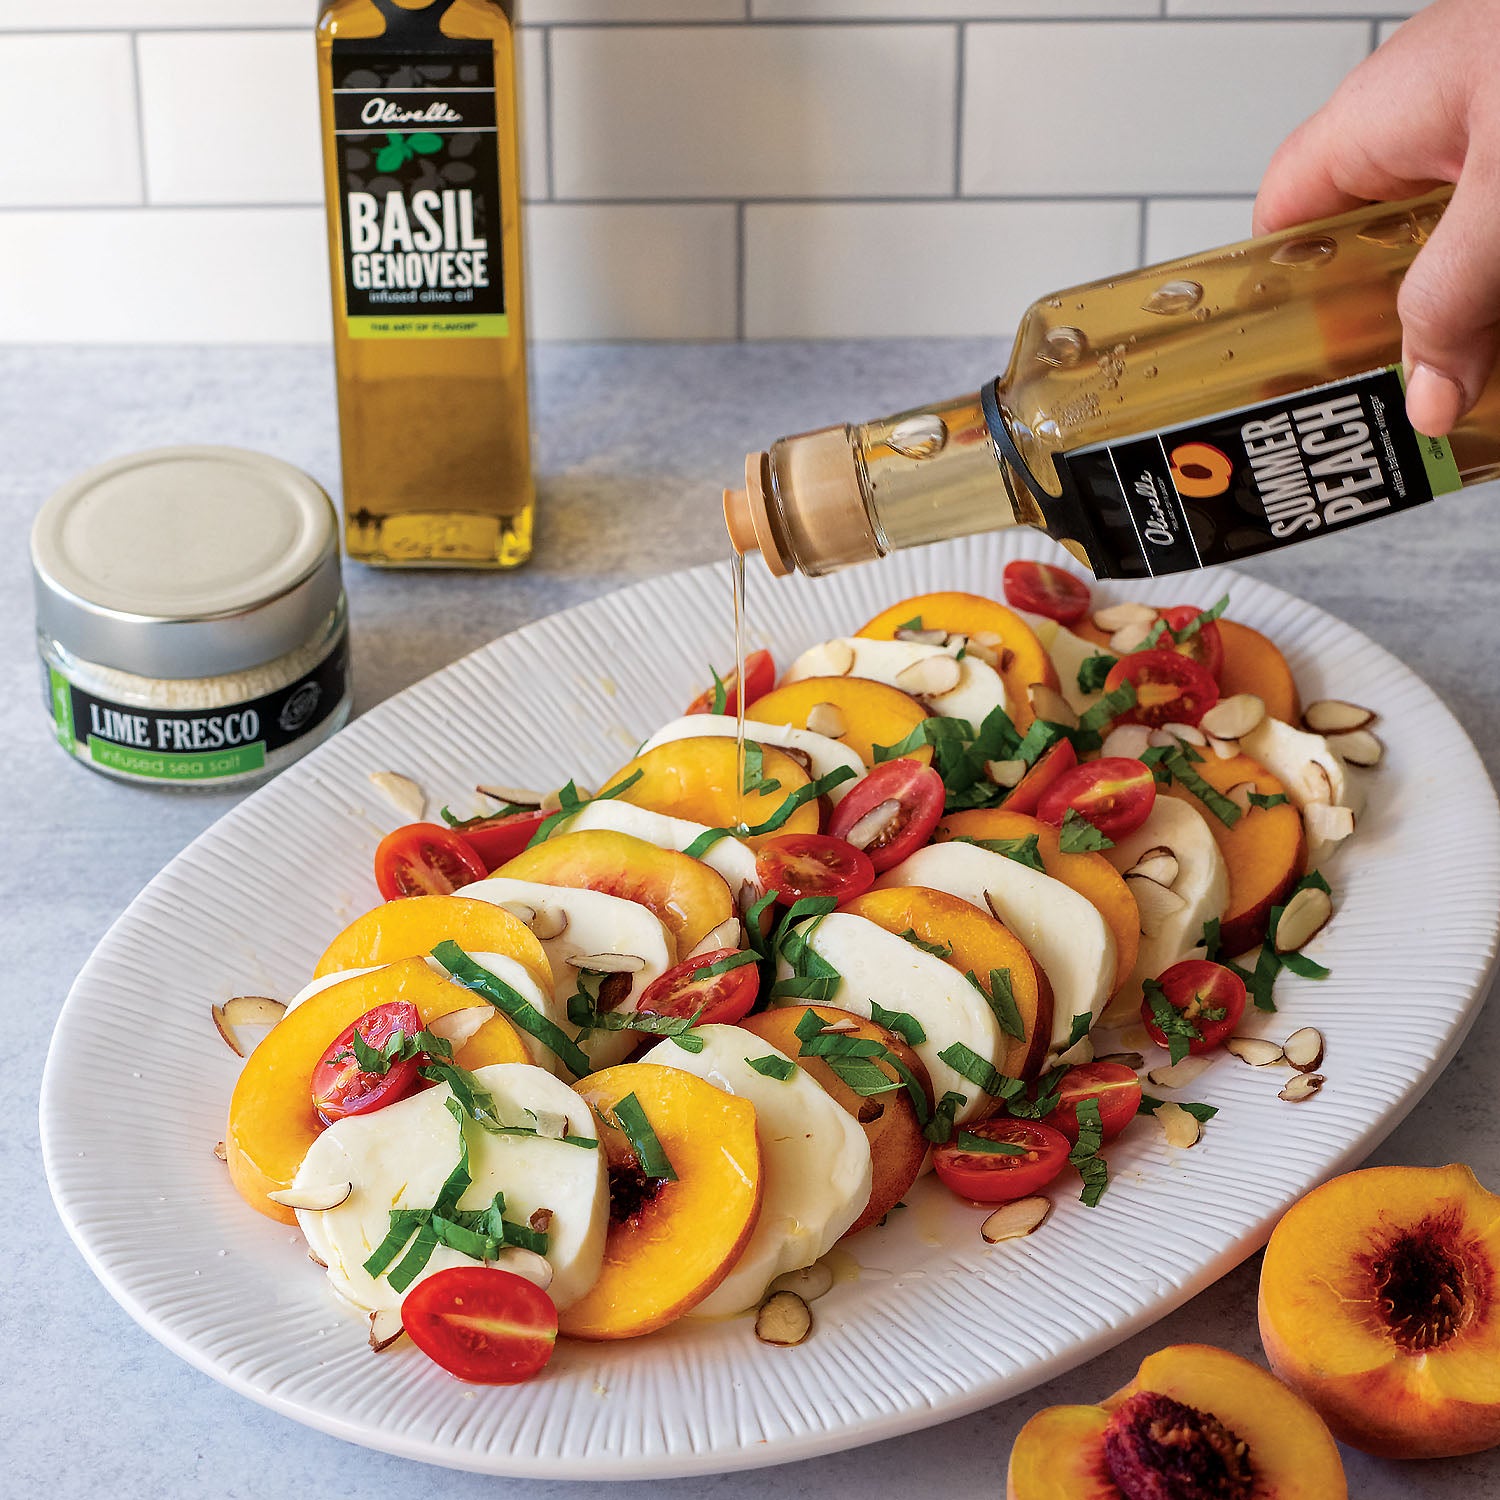 sliced peaches and mozzarella with basil, almonds, tomatoes, and peach balsamic vinegar served on a white platter next to peach vinegar and fresh, whole peaches